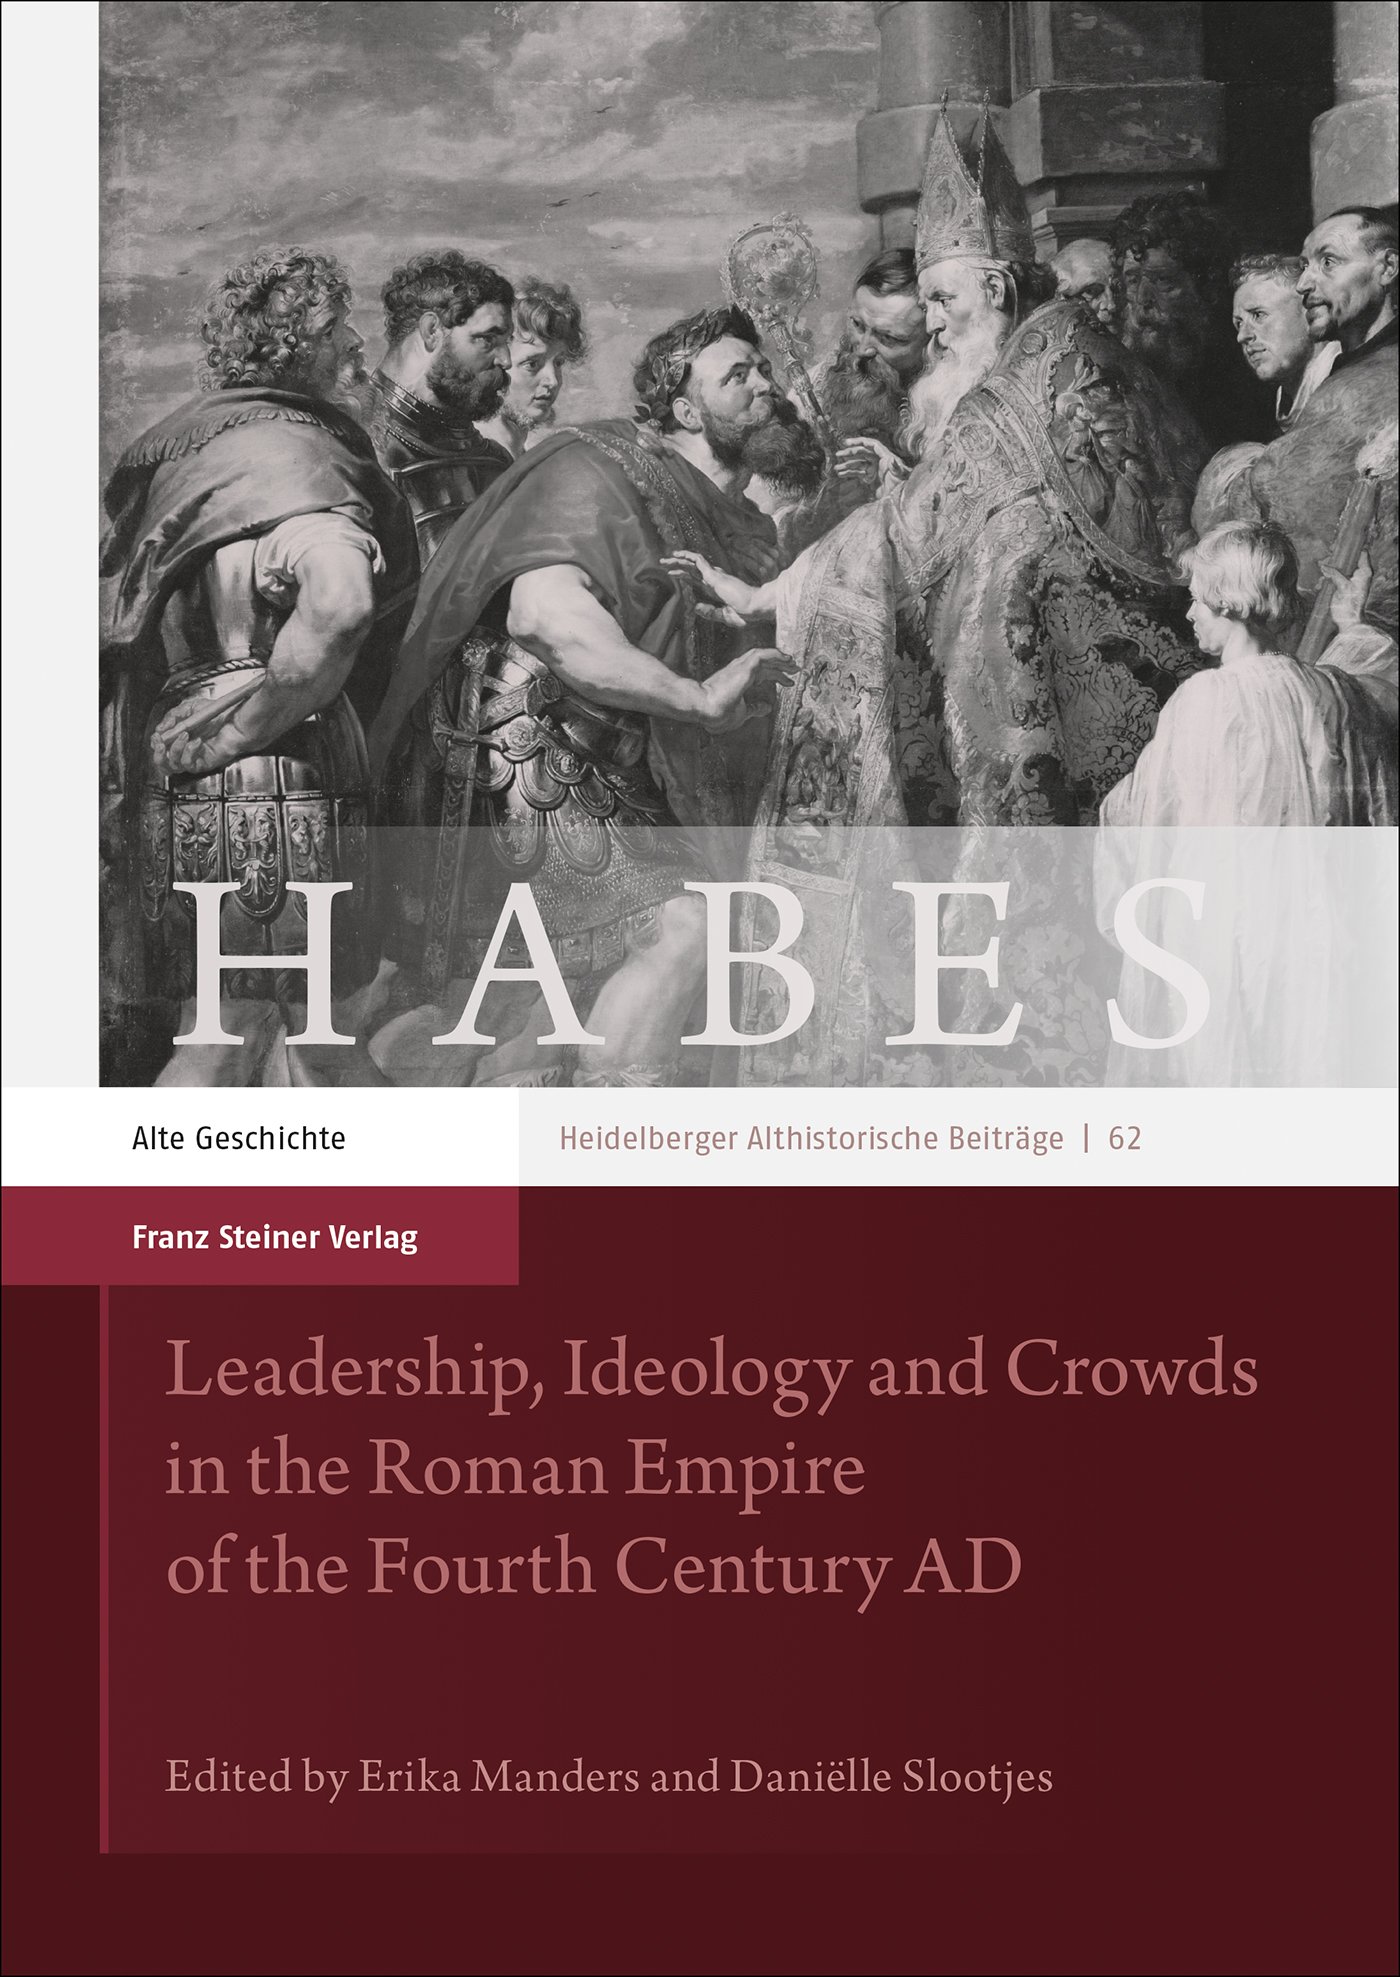 Leadership, Ideology and Crowds in the Roman Empire of the Fourth Century AD